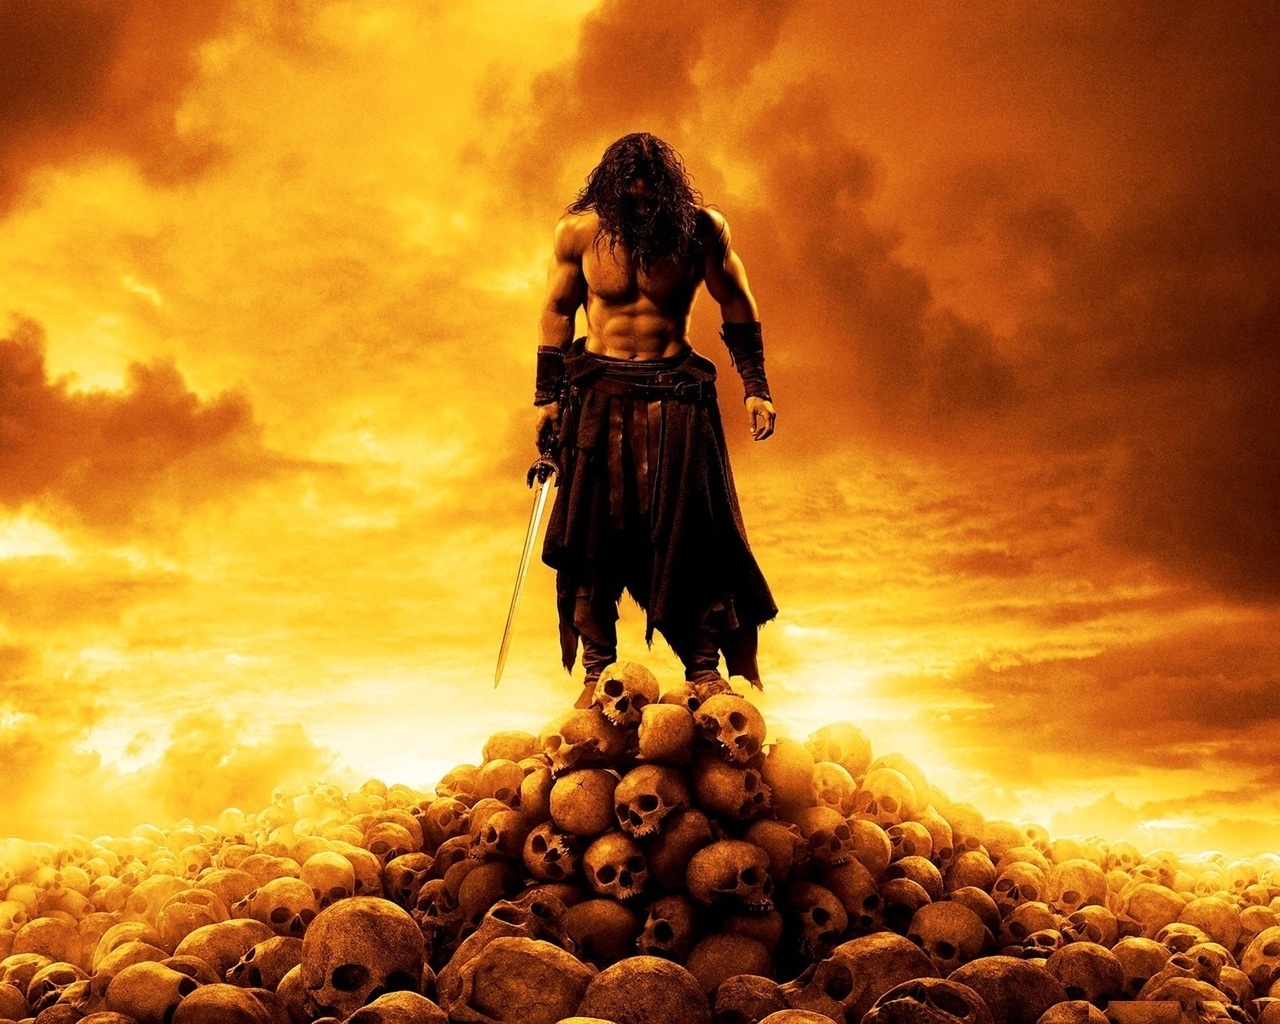 Conan the Barbarian 2011 for 1280 x 1024 resolution